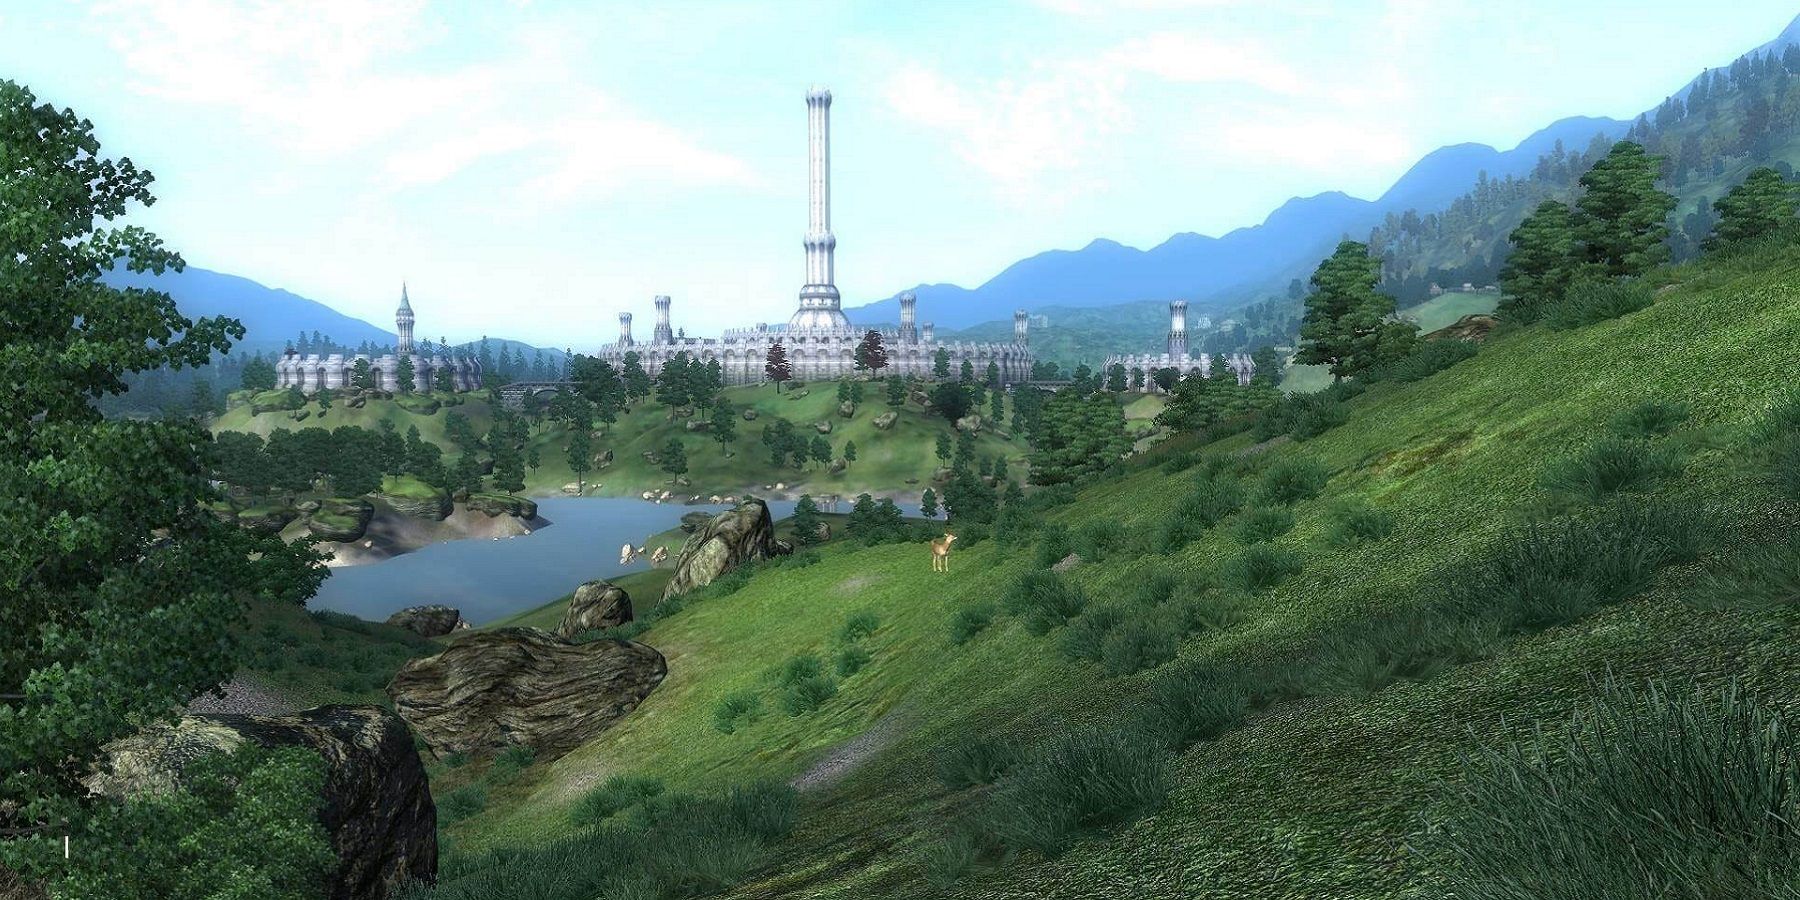 Screenshot from The Elder Scrolls 4: Oblivion showing the Imperial City's White-Gold Tower in the distance.